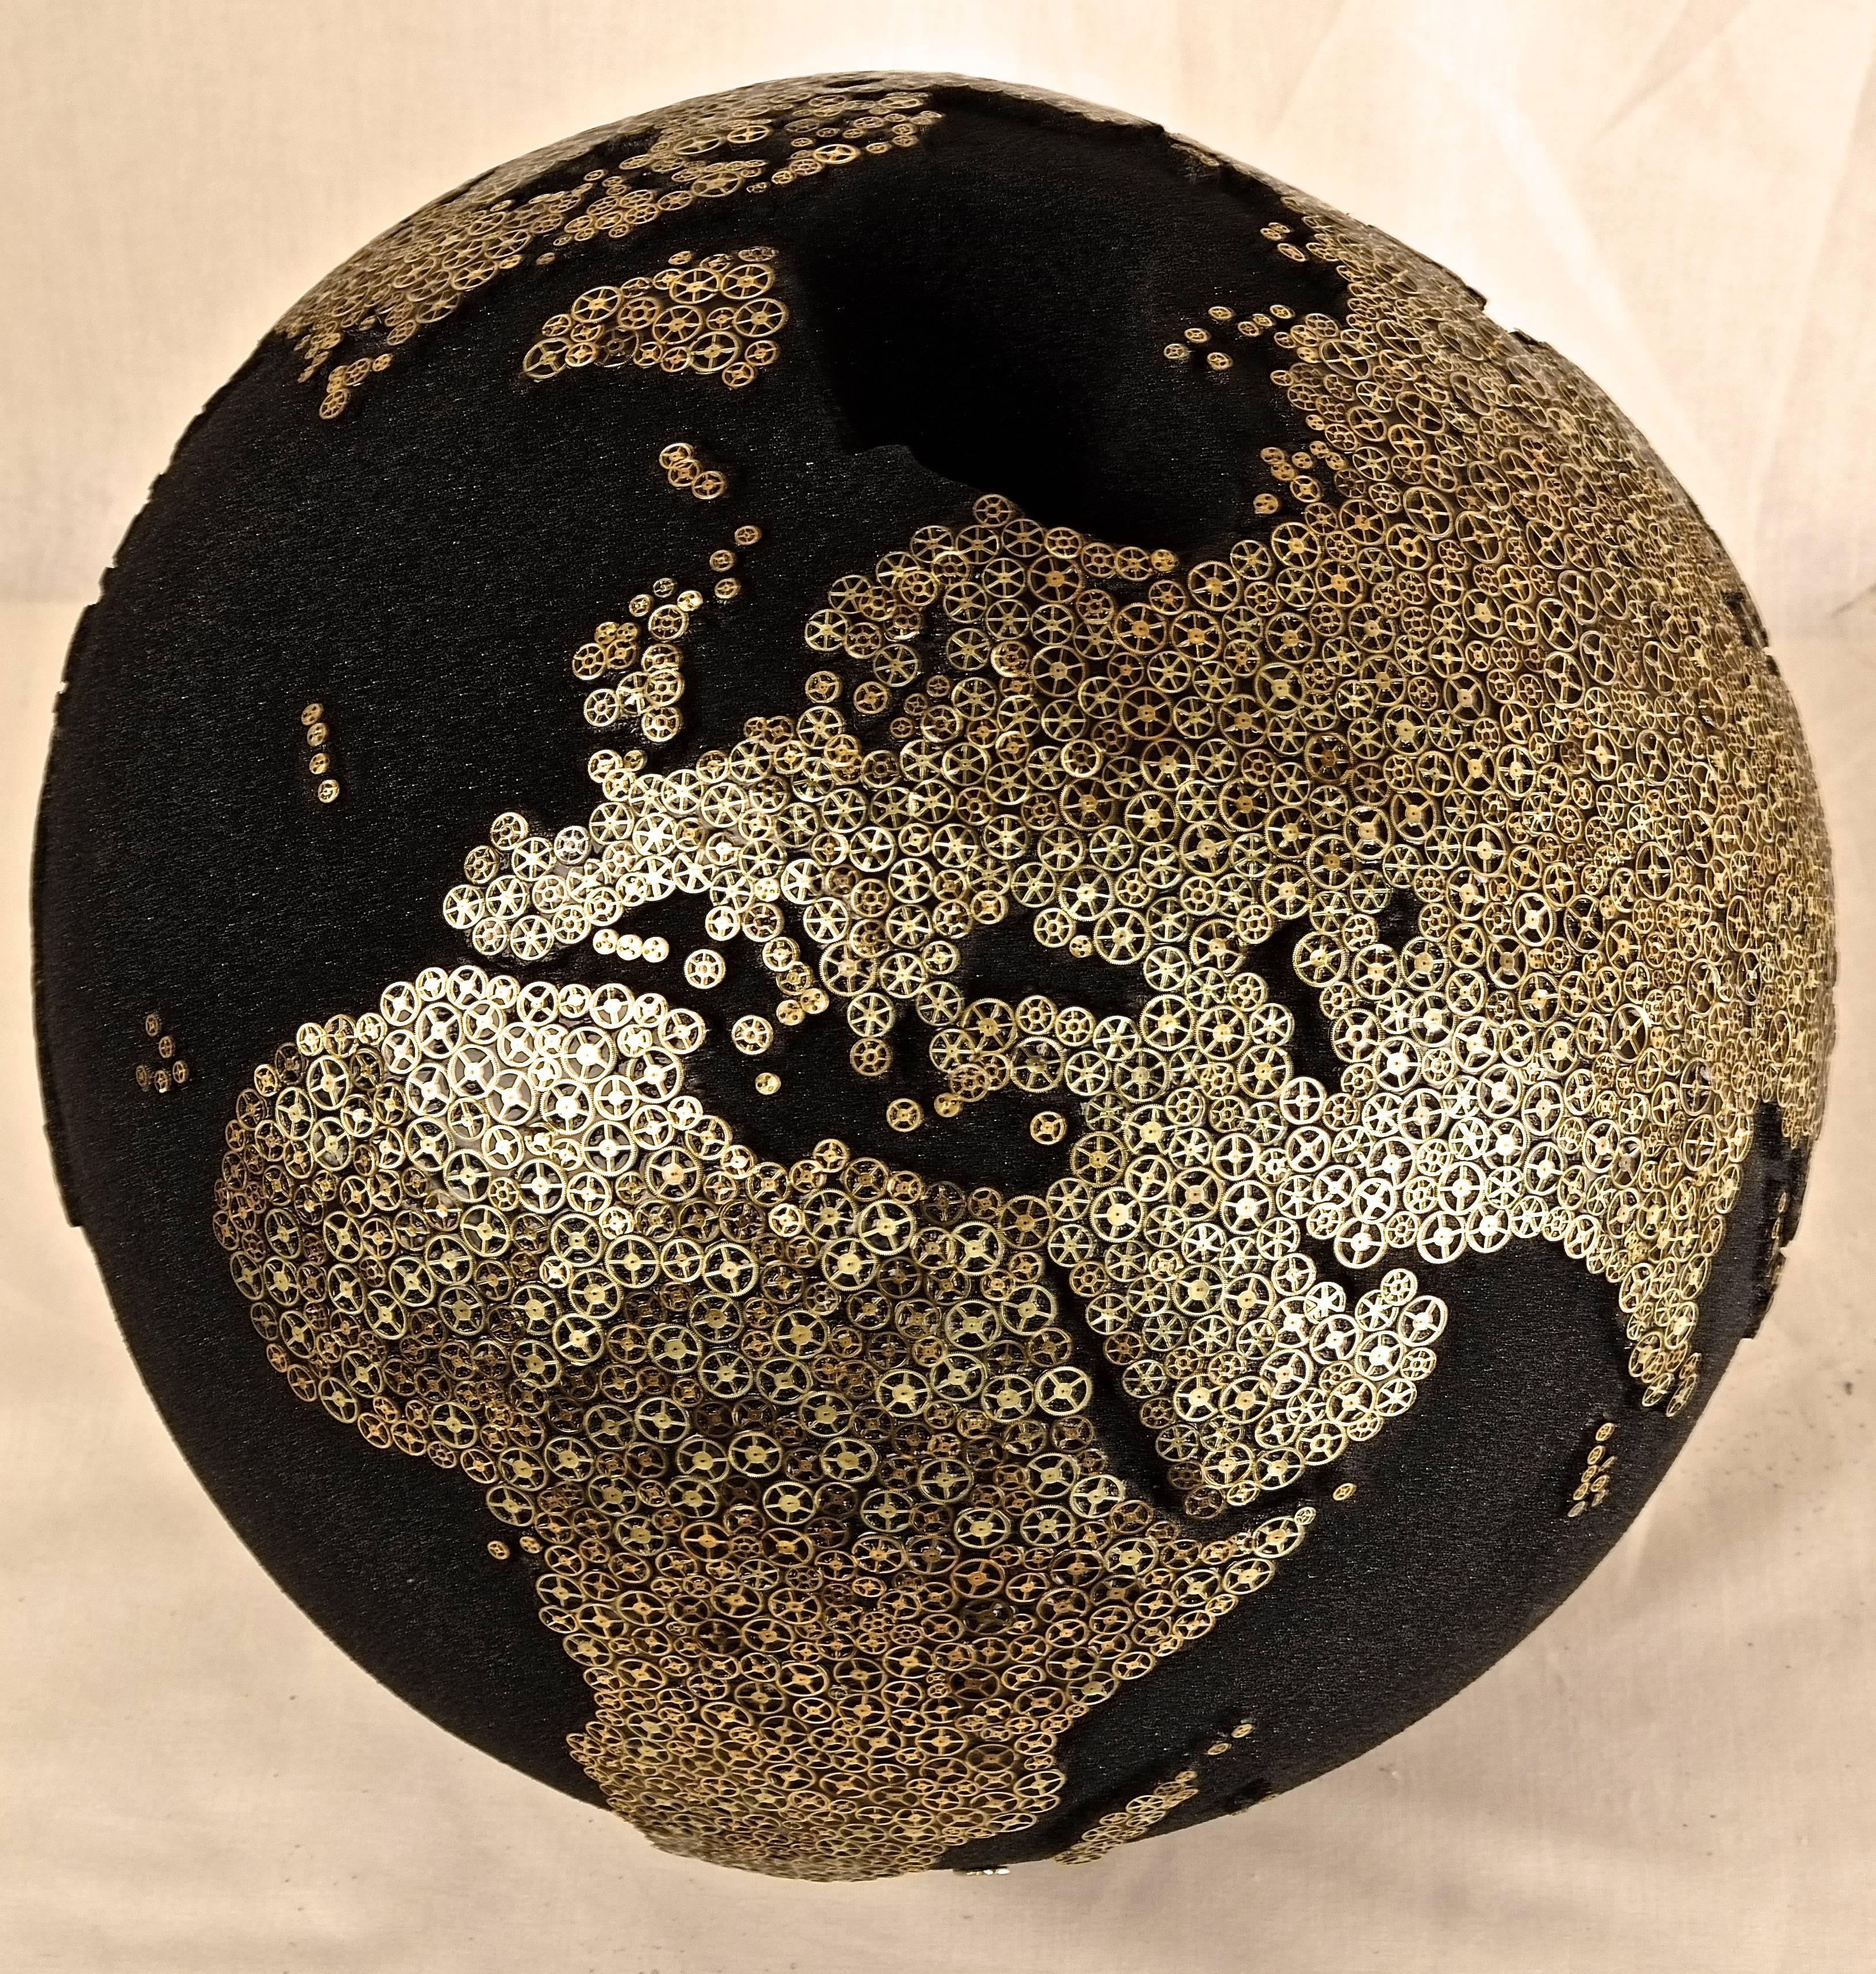 Organic Modern Exceptional Time One of a Kind Globe by Bruno Helgen